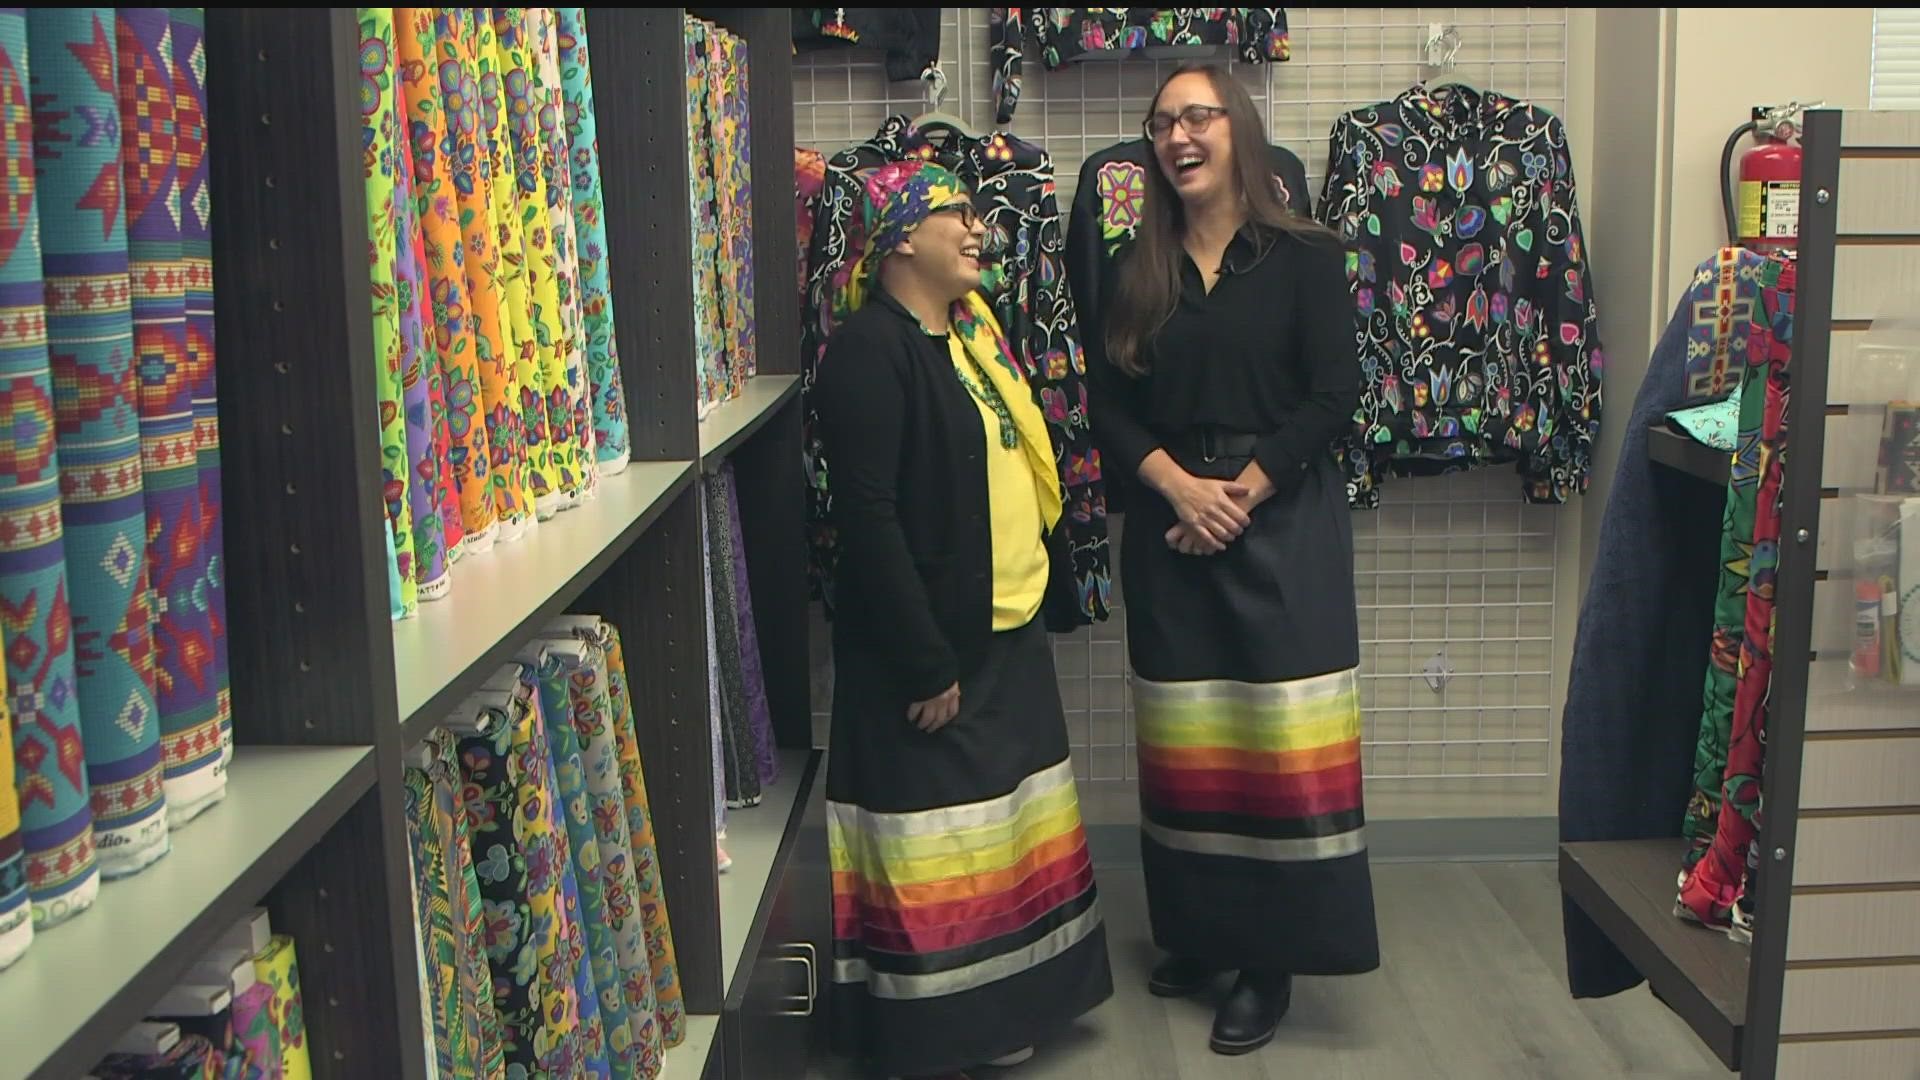 After having no luck finding a local store with Native-designed fabrics to sew powwow regalia for their kids, best friends decided to open a store in Brooklyn Park.